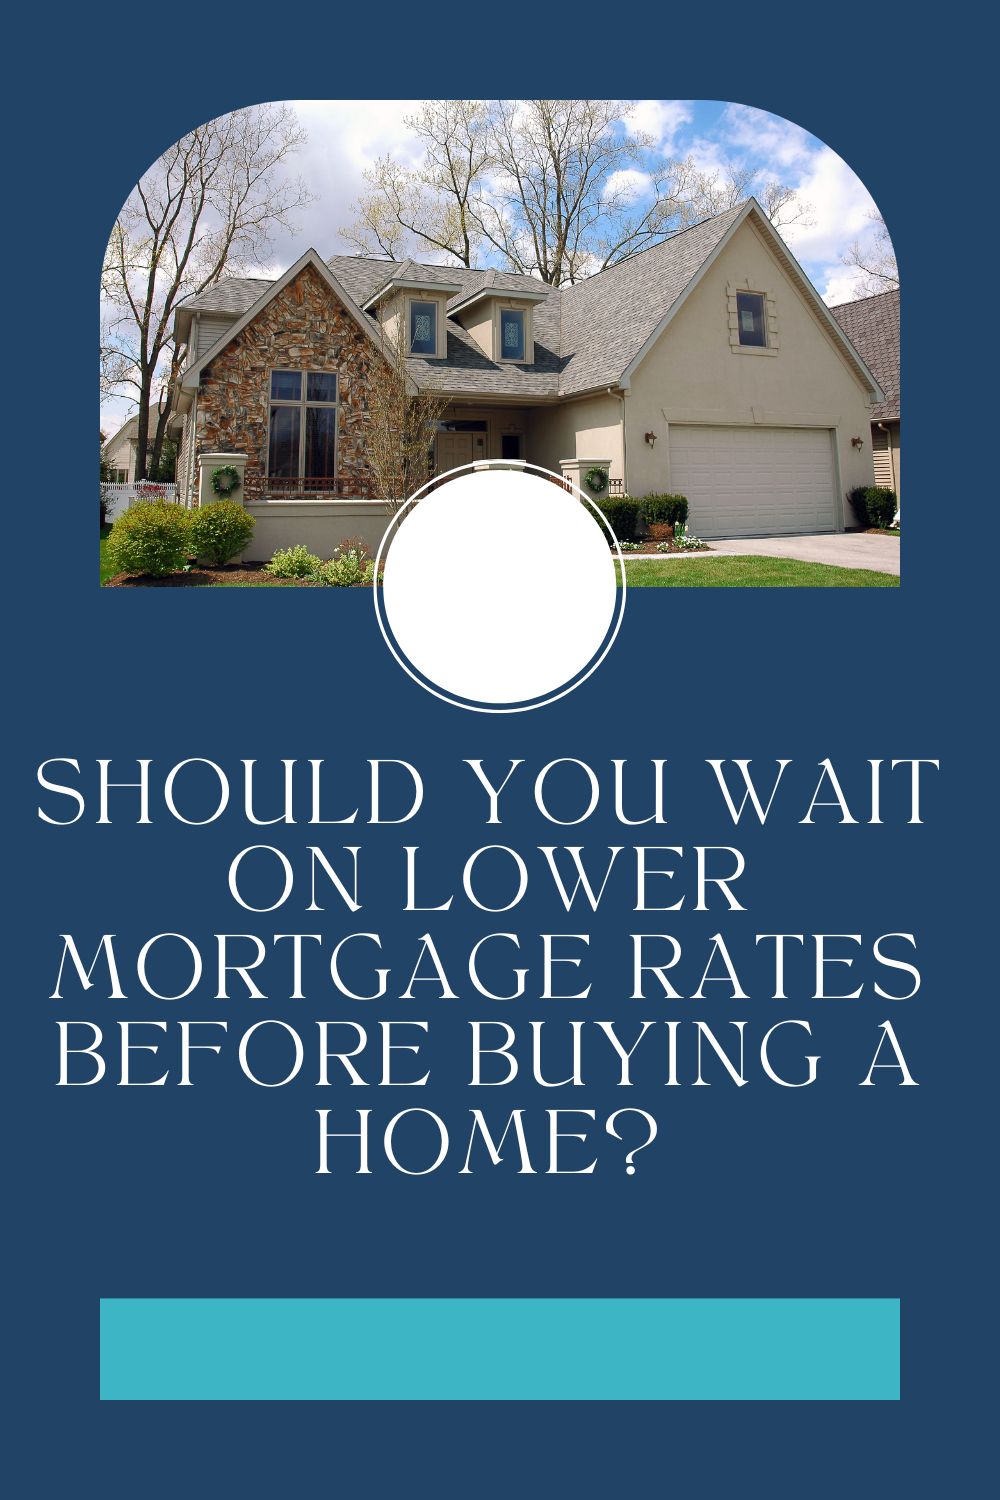 Should You Wait on Lower Mortgage Rates Before Buying a Home?